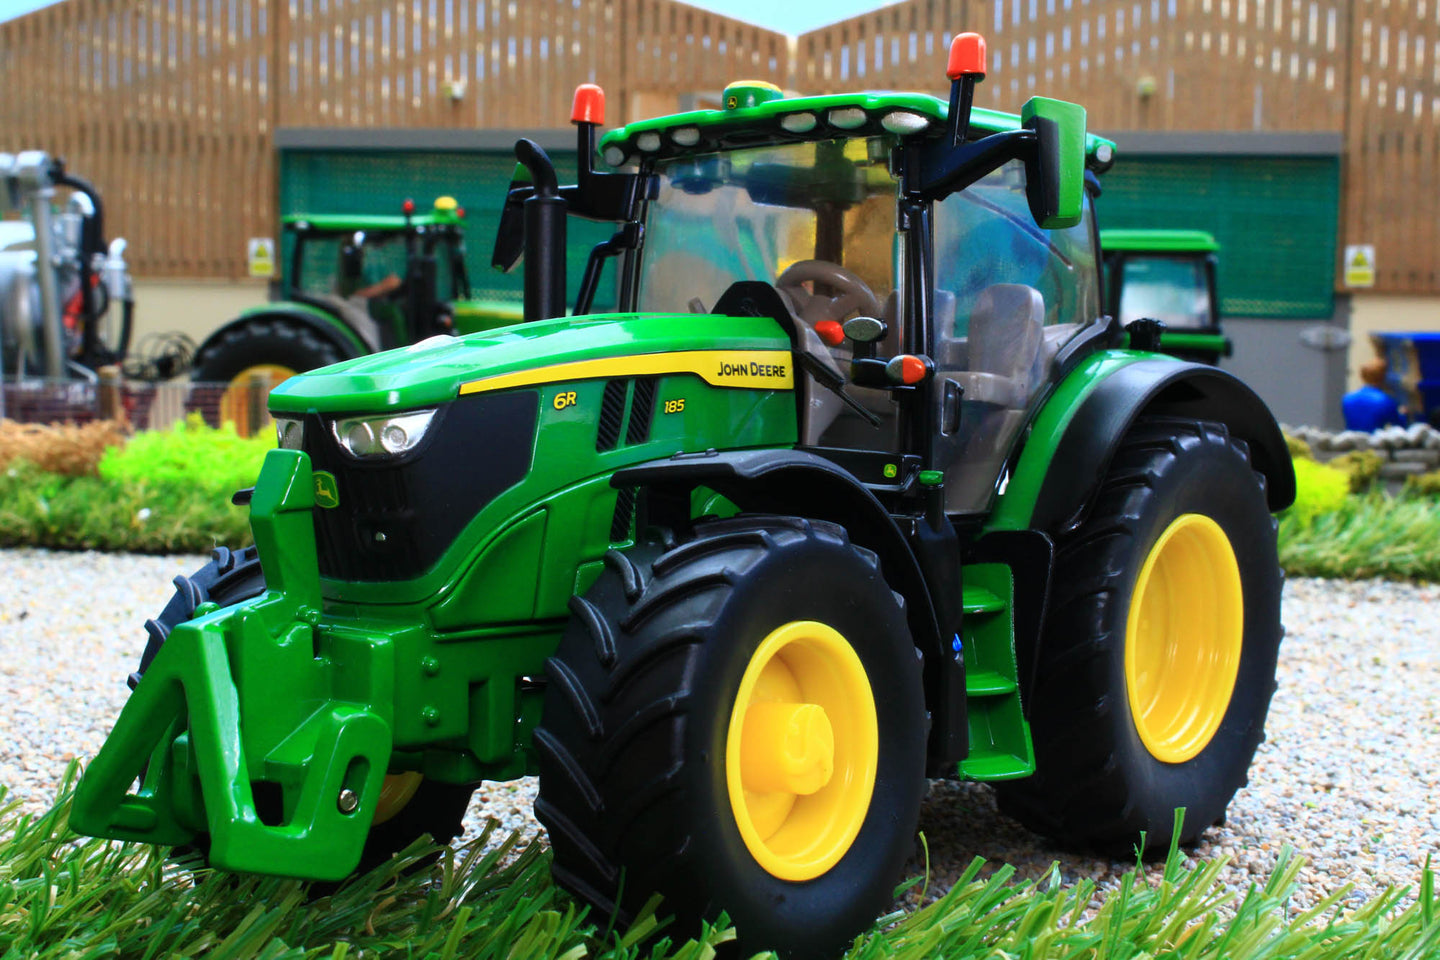 John Deere 6R 185 Tractor - 1/32 scale diecast model by Britains